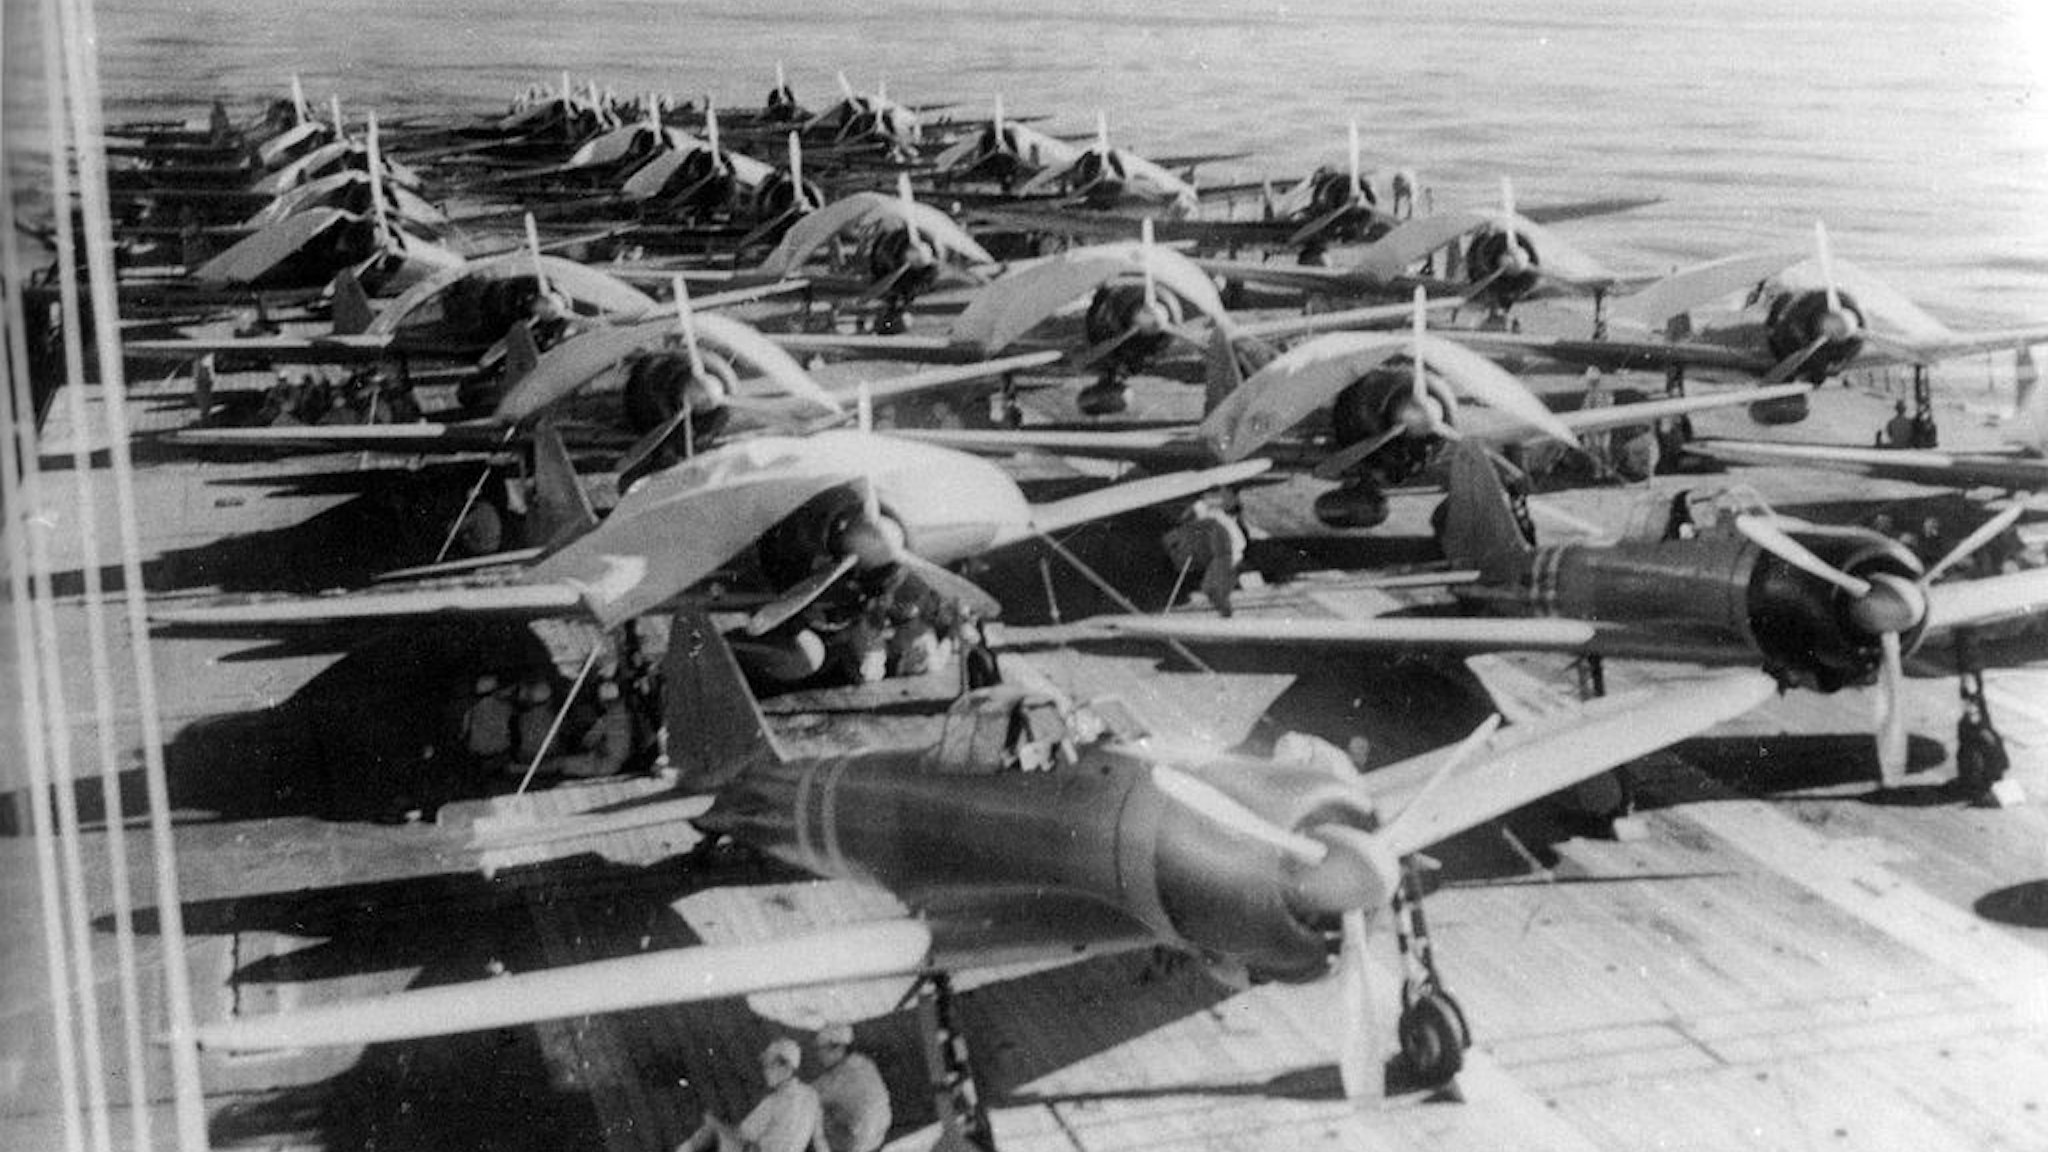 Aircraft are prepared for a morning sortie on the Imperial Japanese Navy aircraft carrier Zuikaku, east of the Solomon Islands, on May 5, 1942.